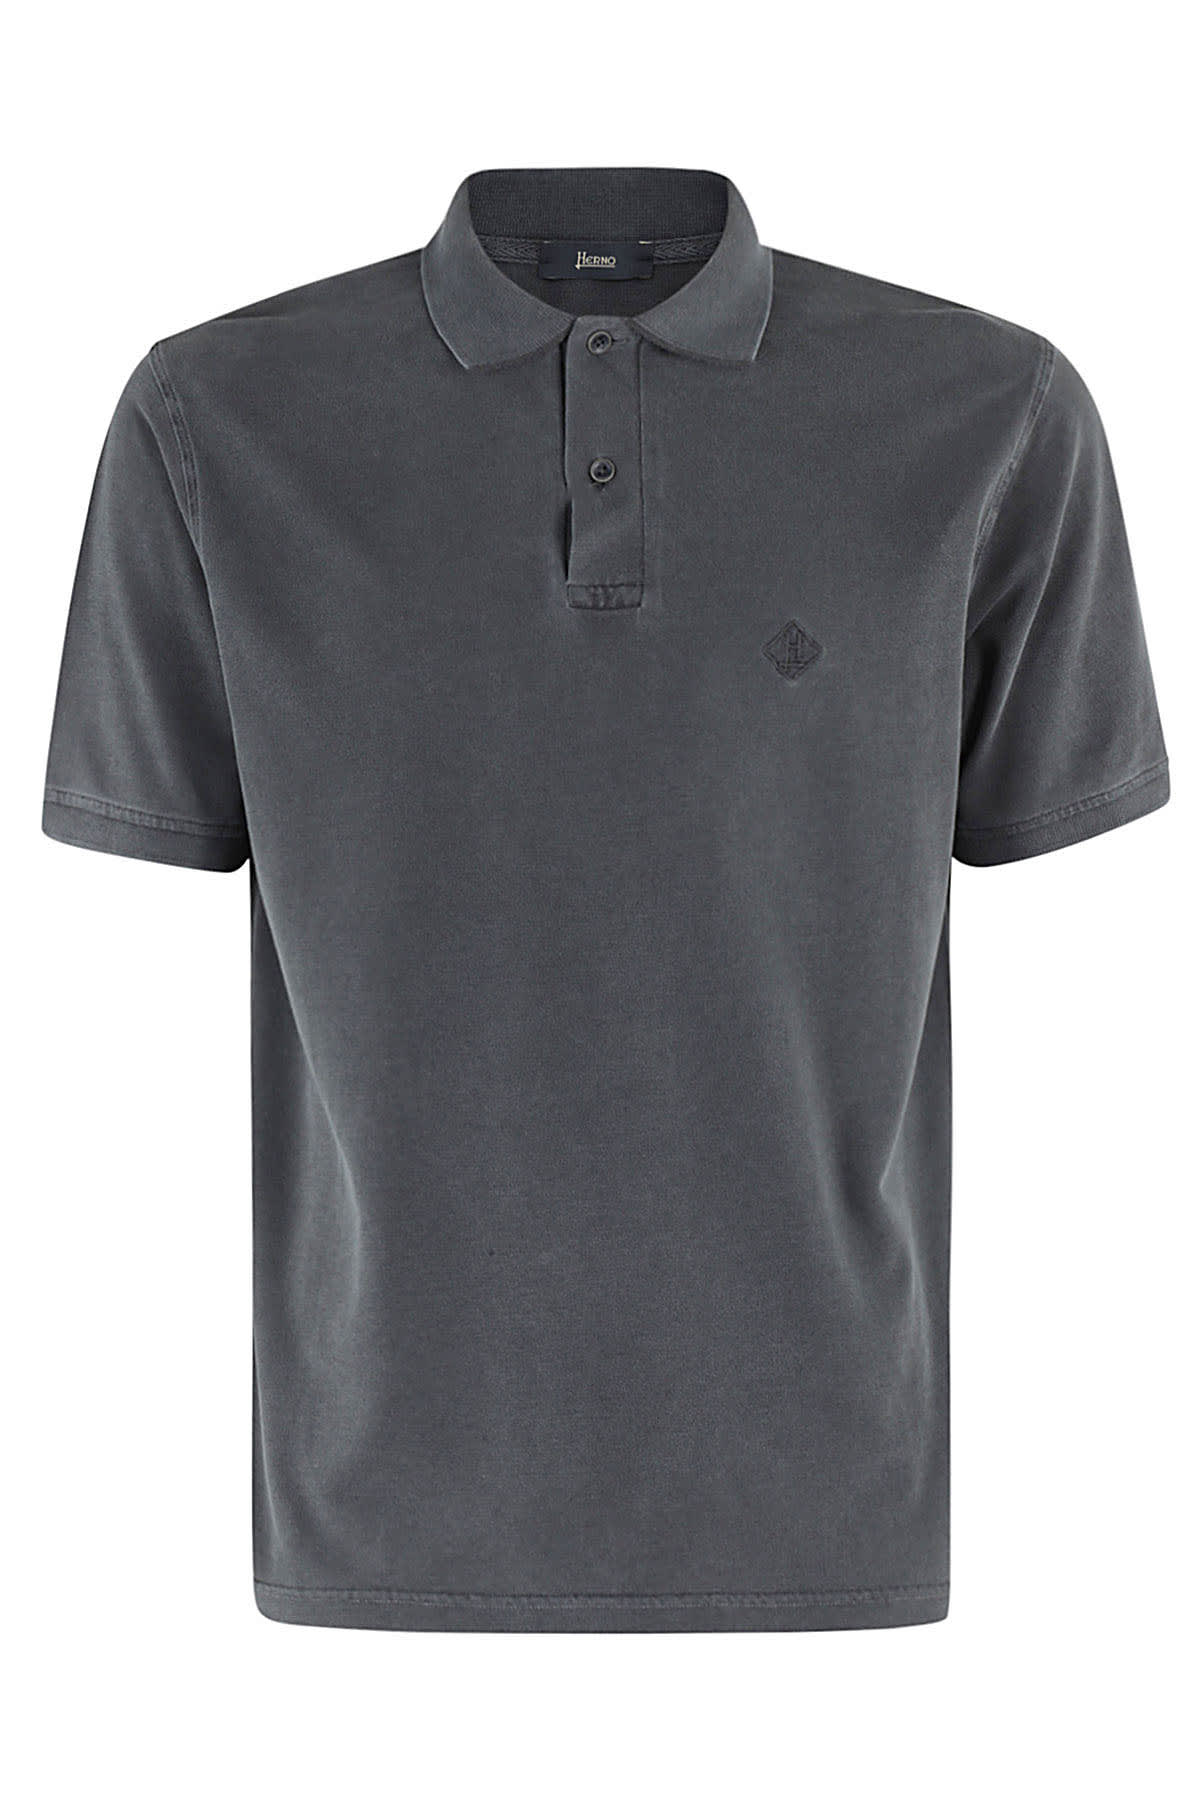 Herno Polo In Blu Navy